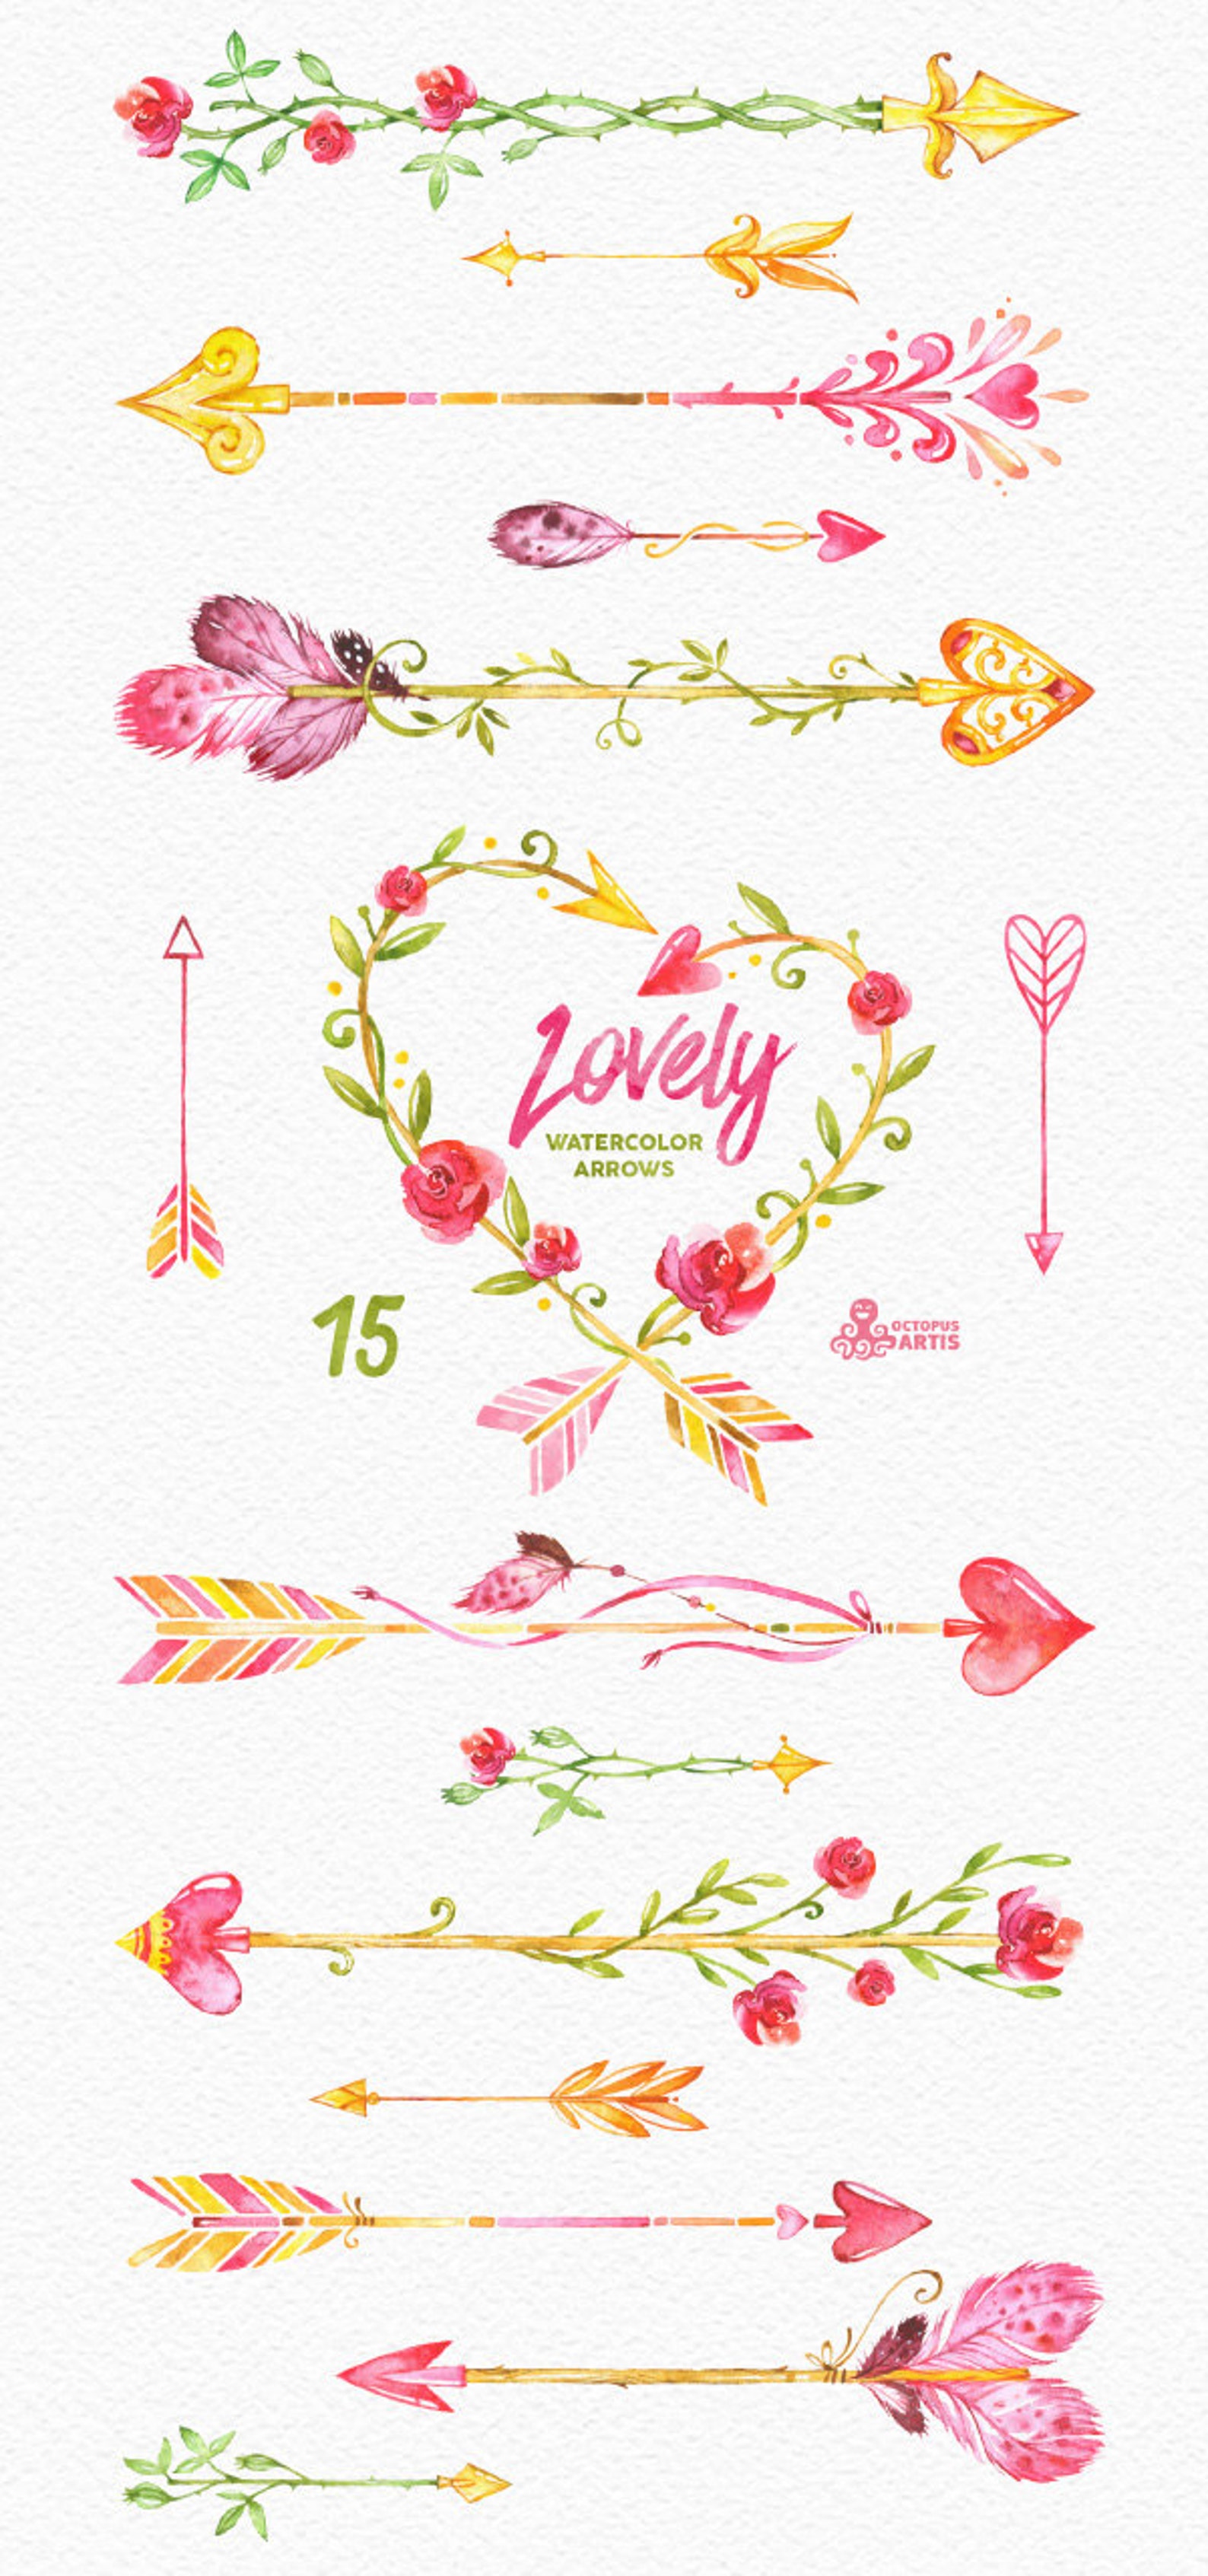 Lovely Watercolor Arrows Clipart. 15 Hand Painted Elements - Etsy